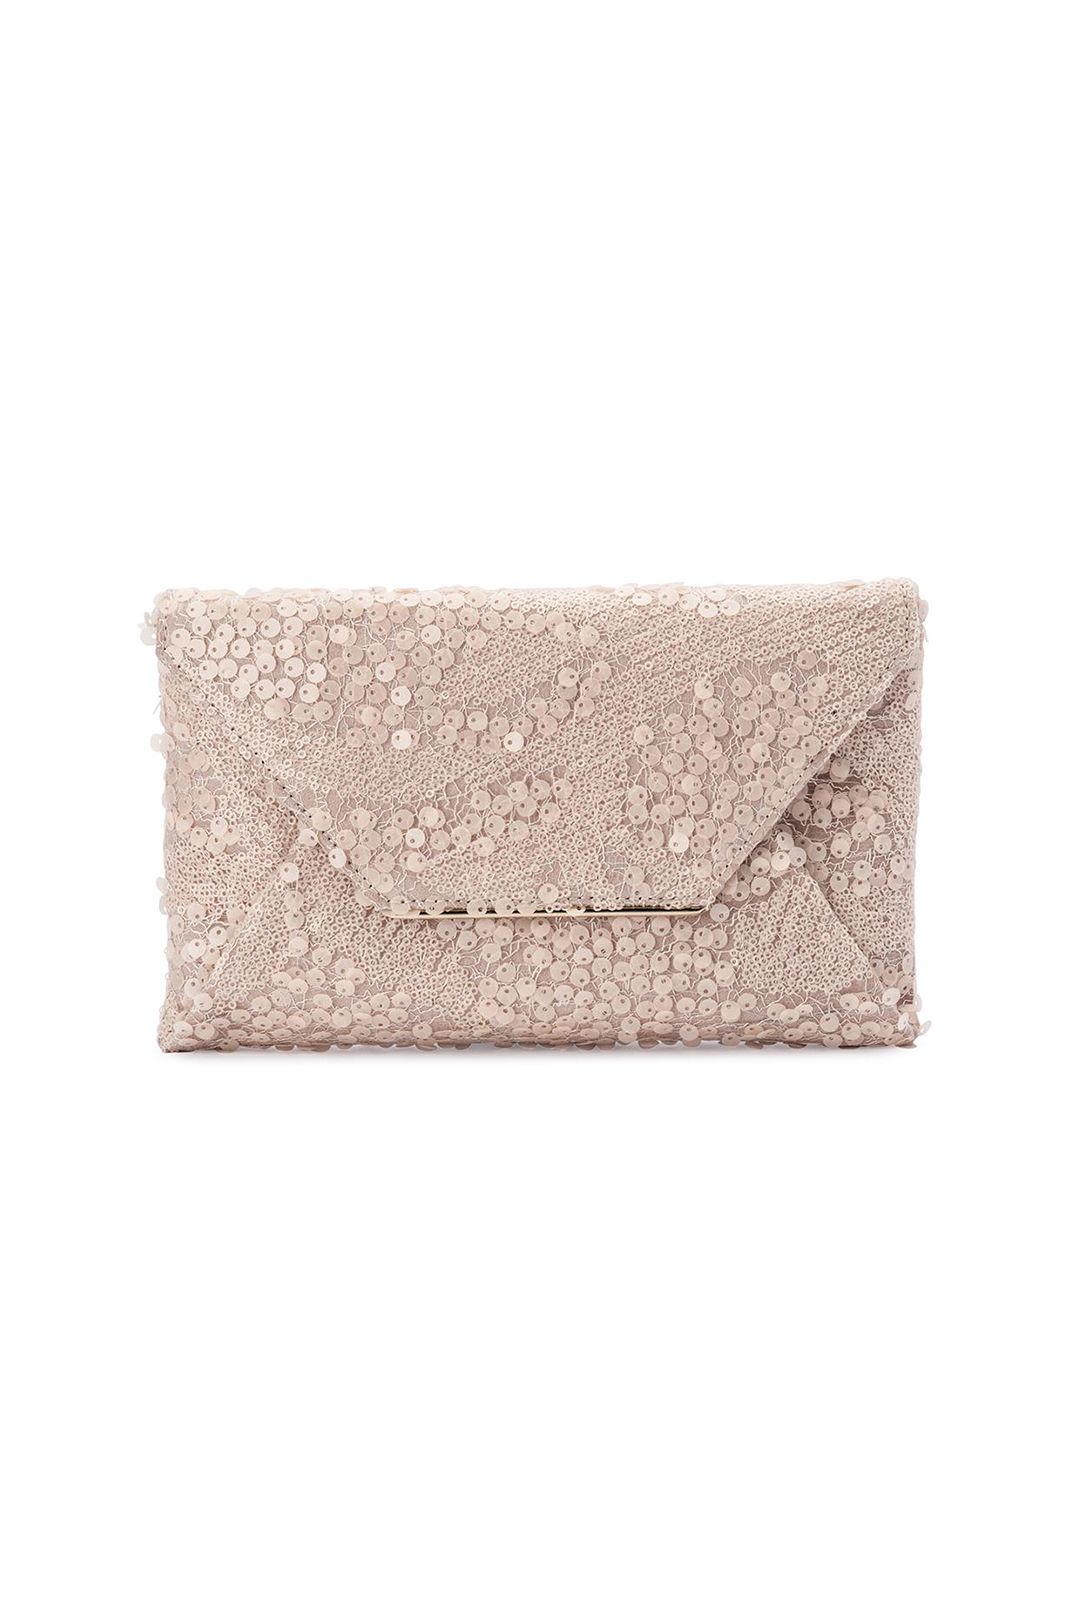 Olga Berg - Chloe Sequin Fold Over Clutch - Champagne - Product